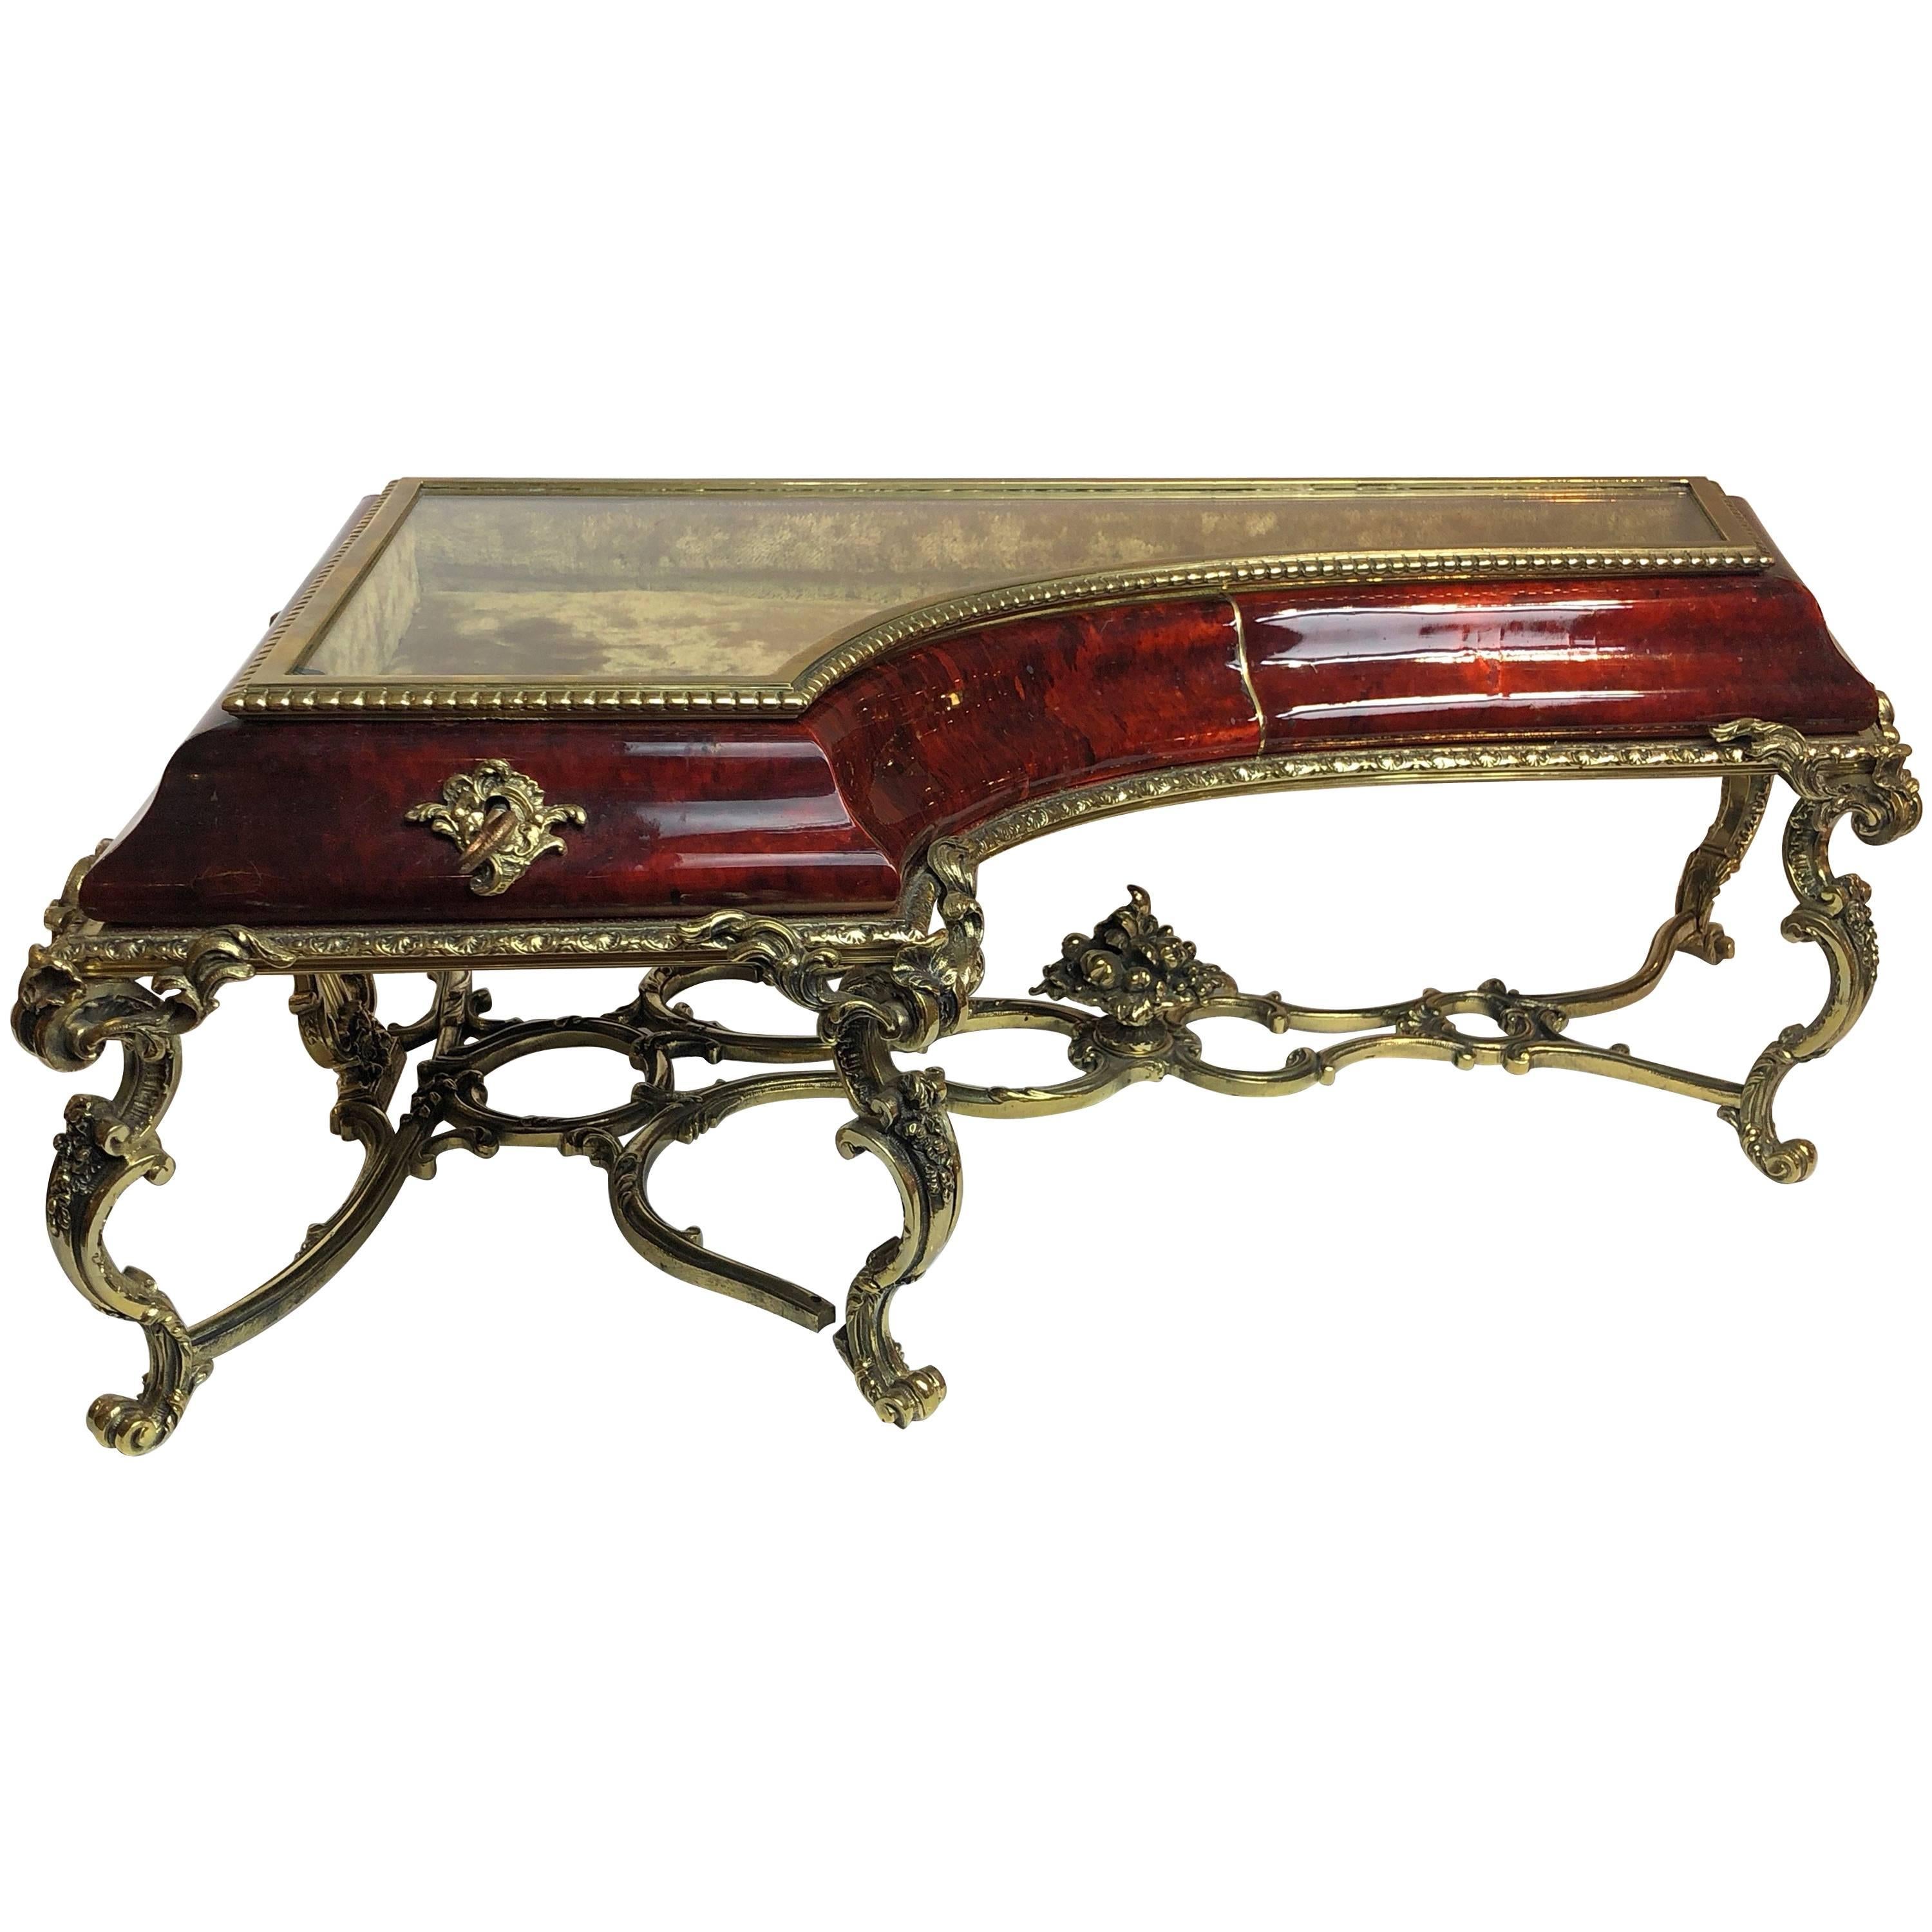 Faux Tortoiseshell and Ormolu Tabletop Vitrine in the Form of a Grand Piano